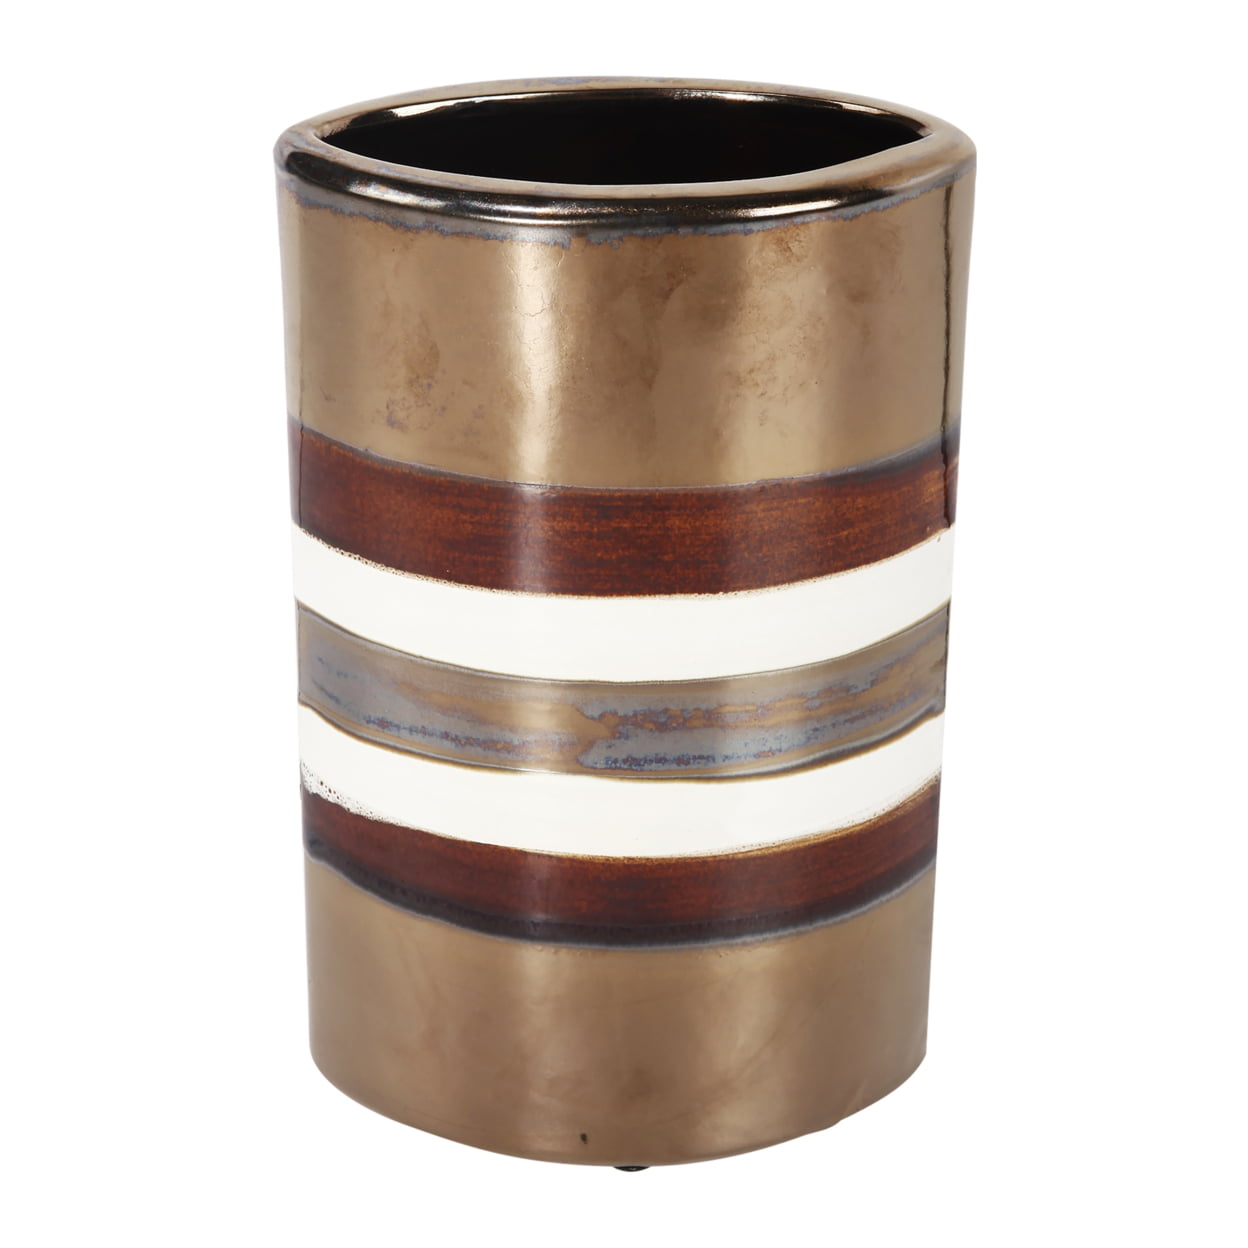 Picture of Benjara BM200929 Cylindrical Shape Ceramic Decorative Vase with Bands, Multi Color